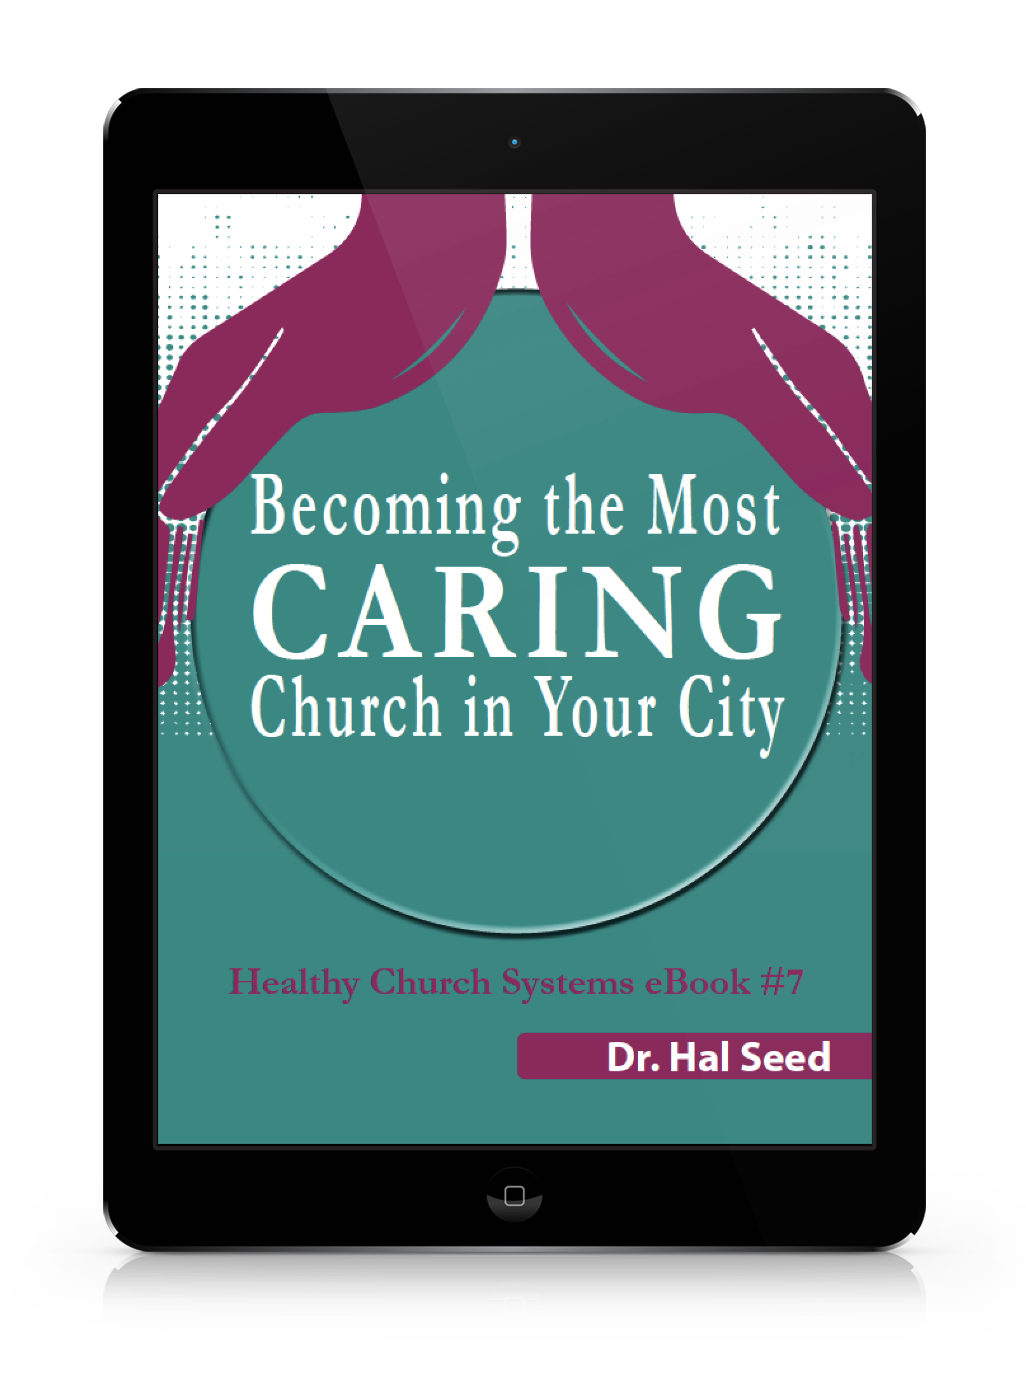 Ebook #7: Becoming the Most Caring Church in your City